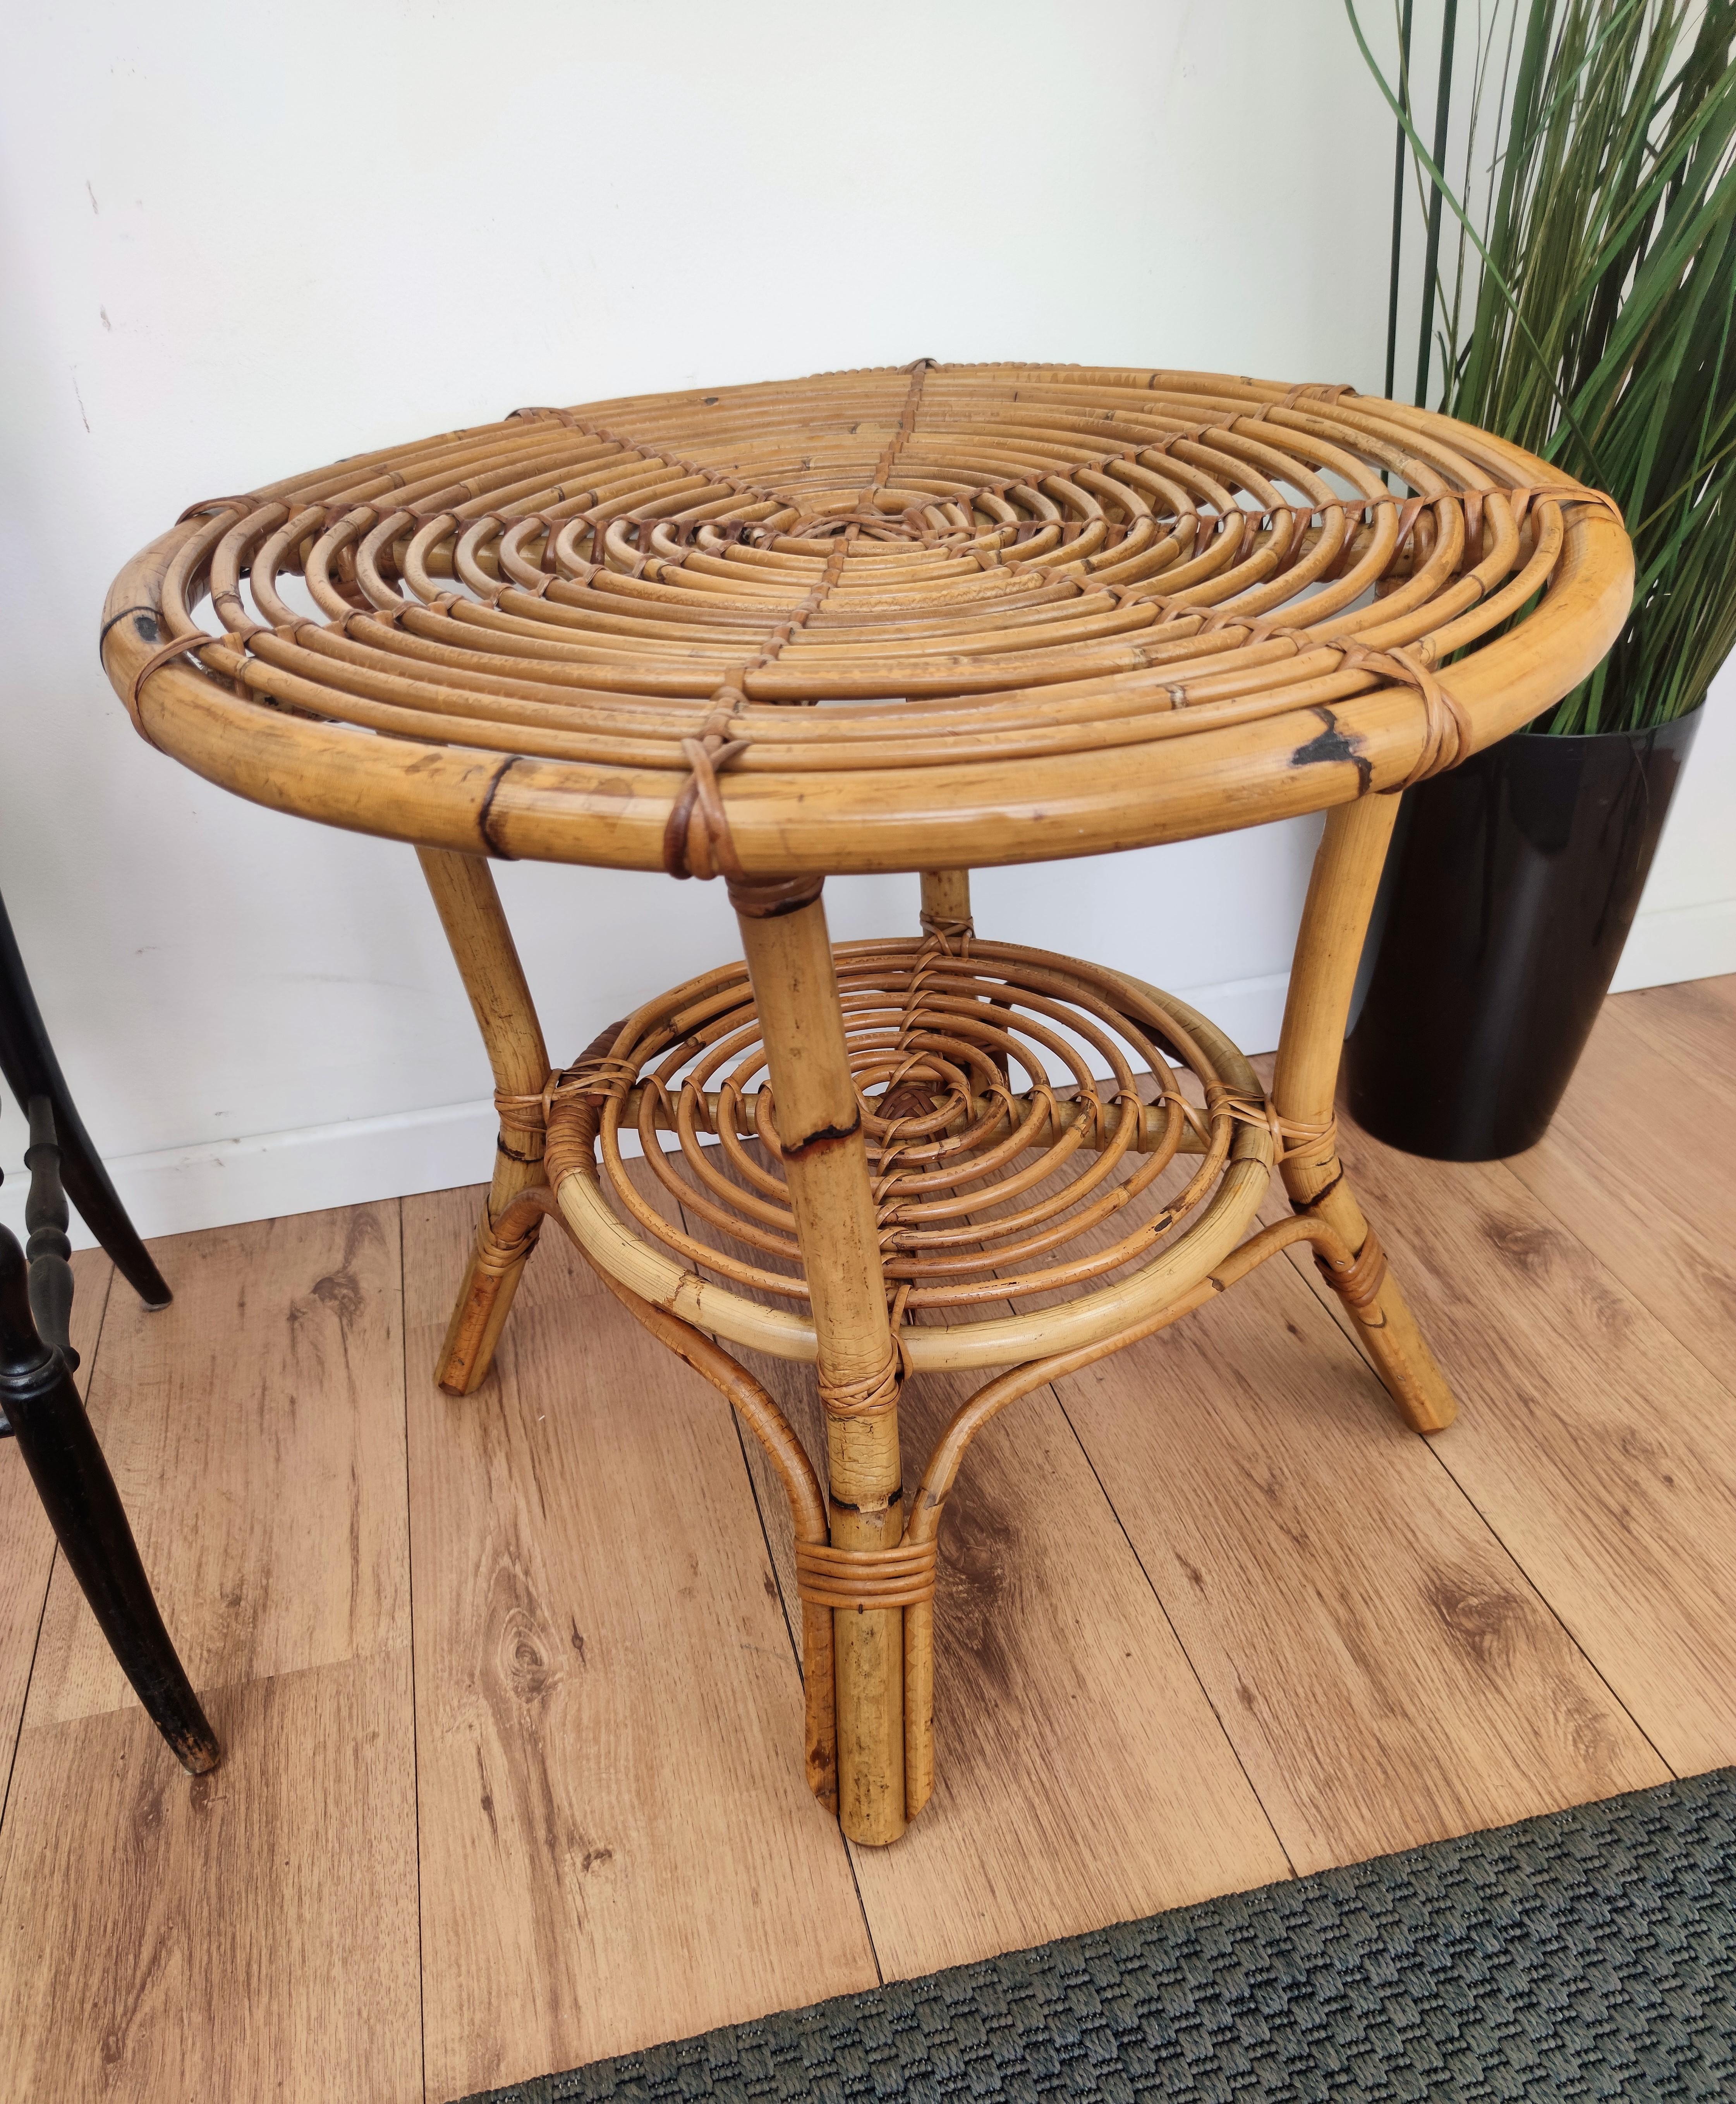 French Provincial 1960s Italian Bamboo Rattan Bohemian French Riviera Round Coffee or Accent Table